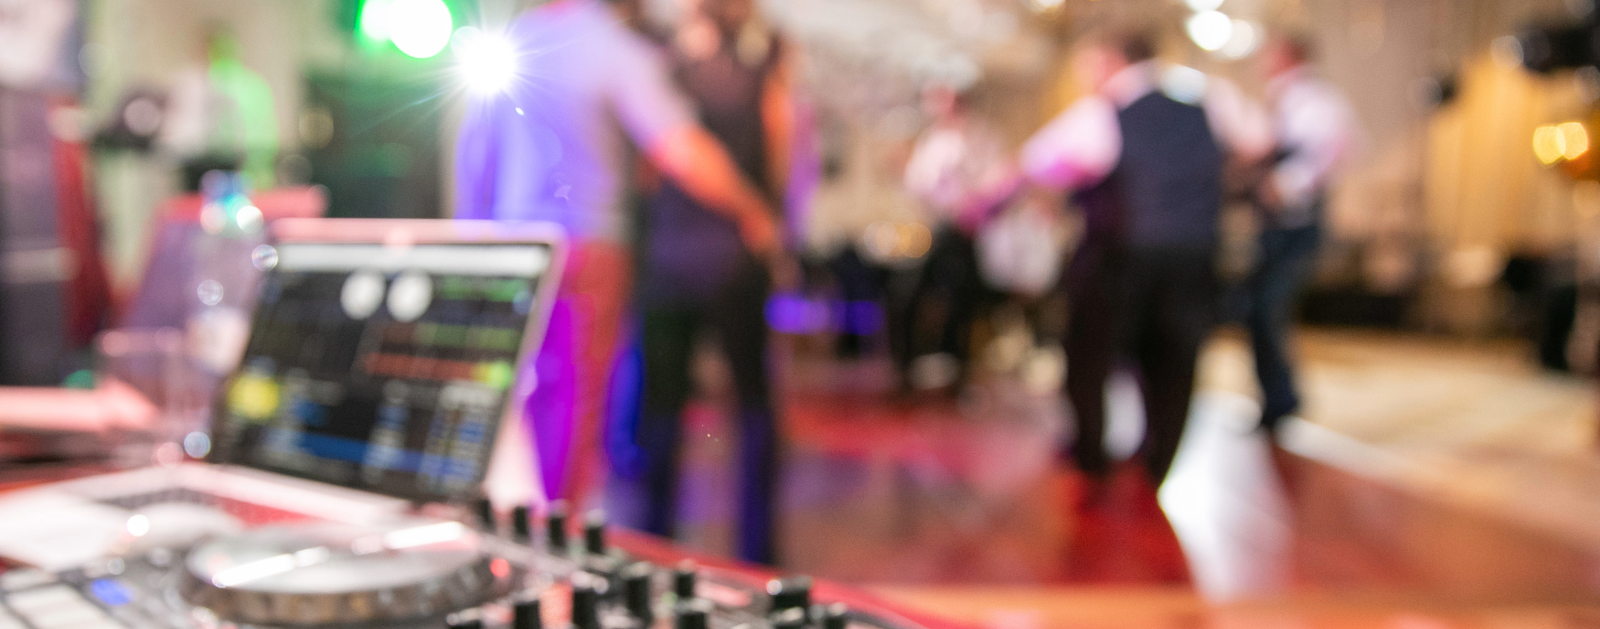 Wedding DJ booth at wedding reception with guests dancing to music.